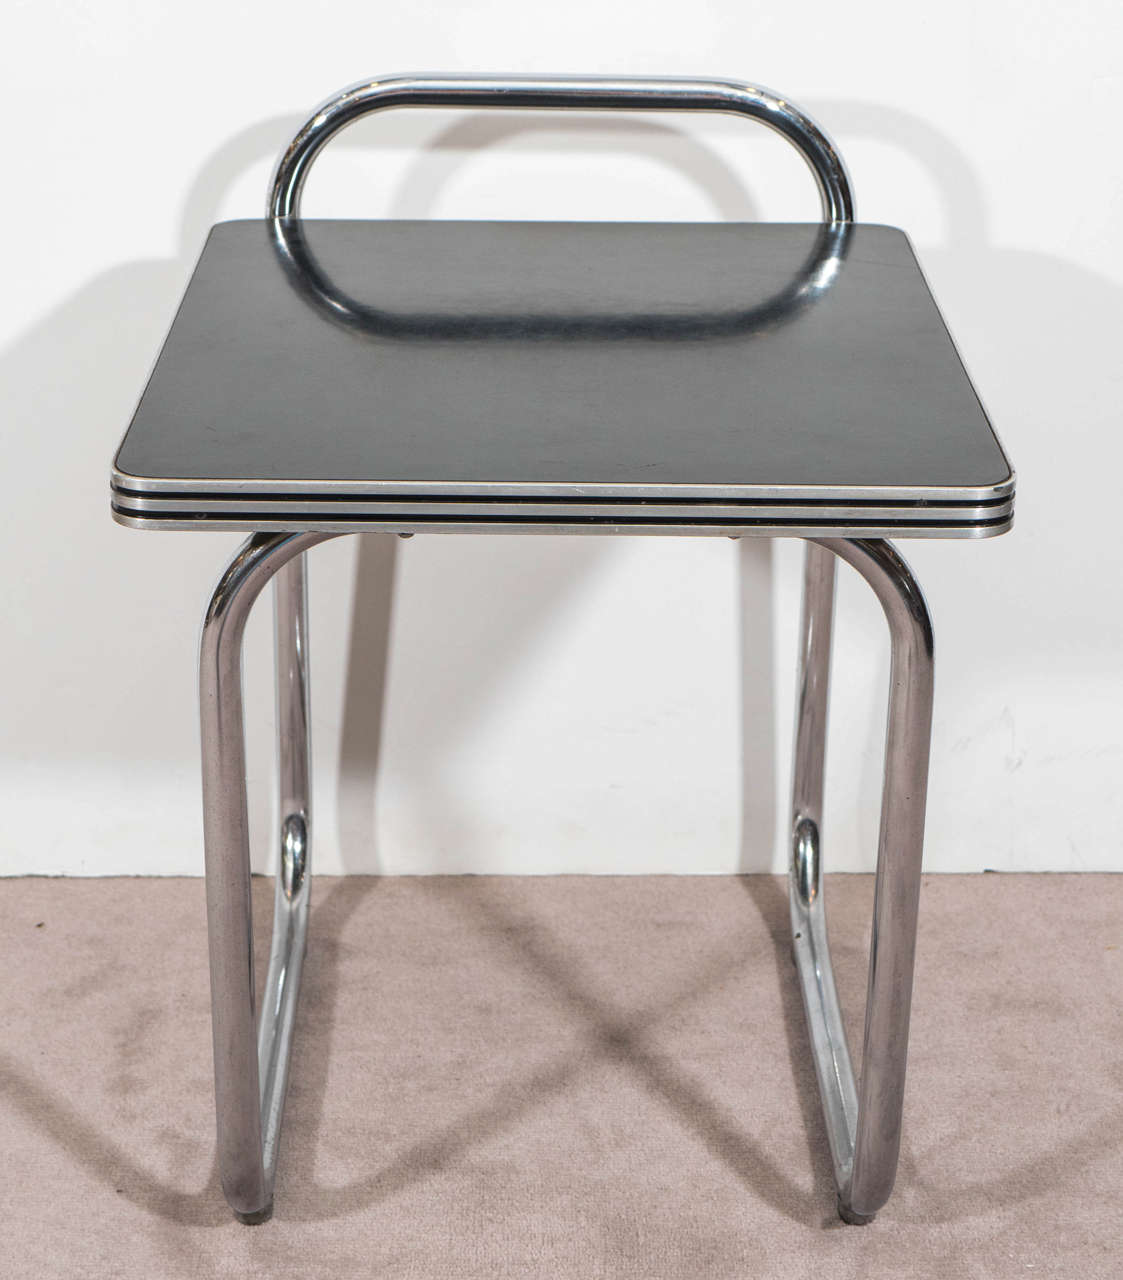 A pair of black laminated end or side tables, on tubular chrome legs, in the style of Bauhaus Era designer Marcel Breuer, produced circa 1930s. Good vintage condition with some age appropriate wear.